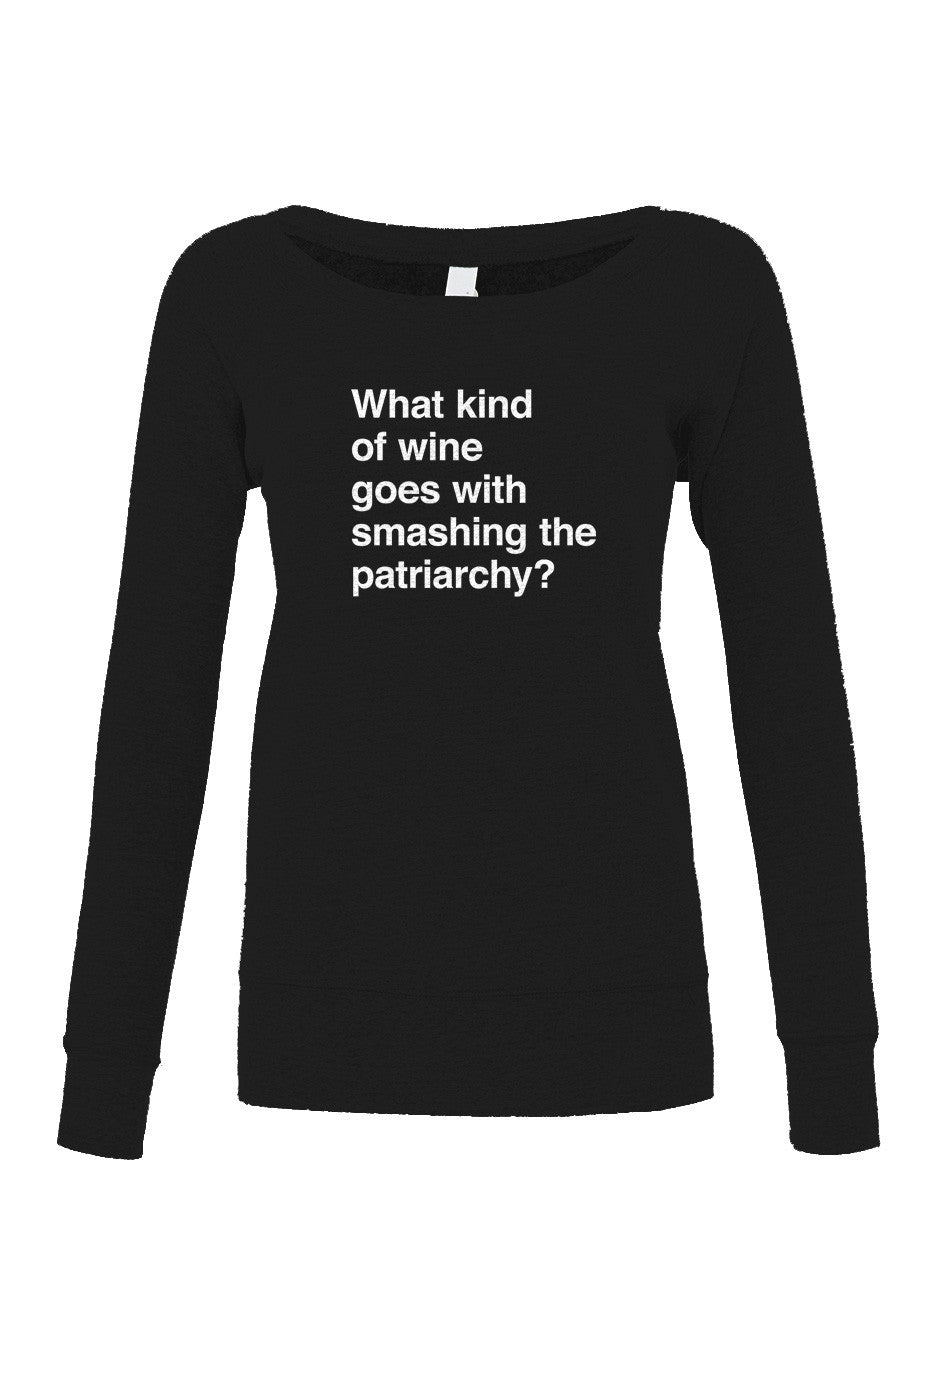 Women's What Kind of Wine Goes with Smashing the Patriarchy? Scoop Neck Fleece - Funny Feminist Shirt